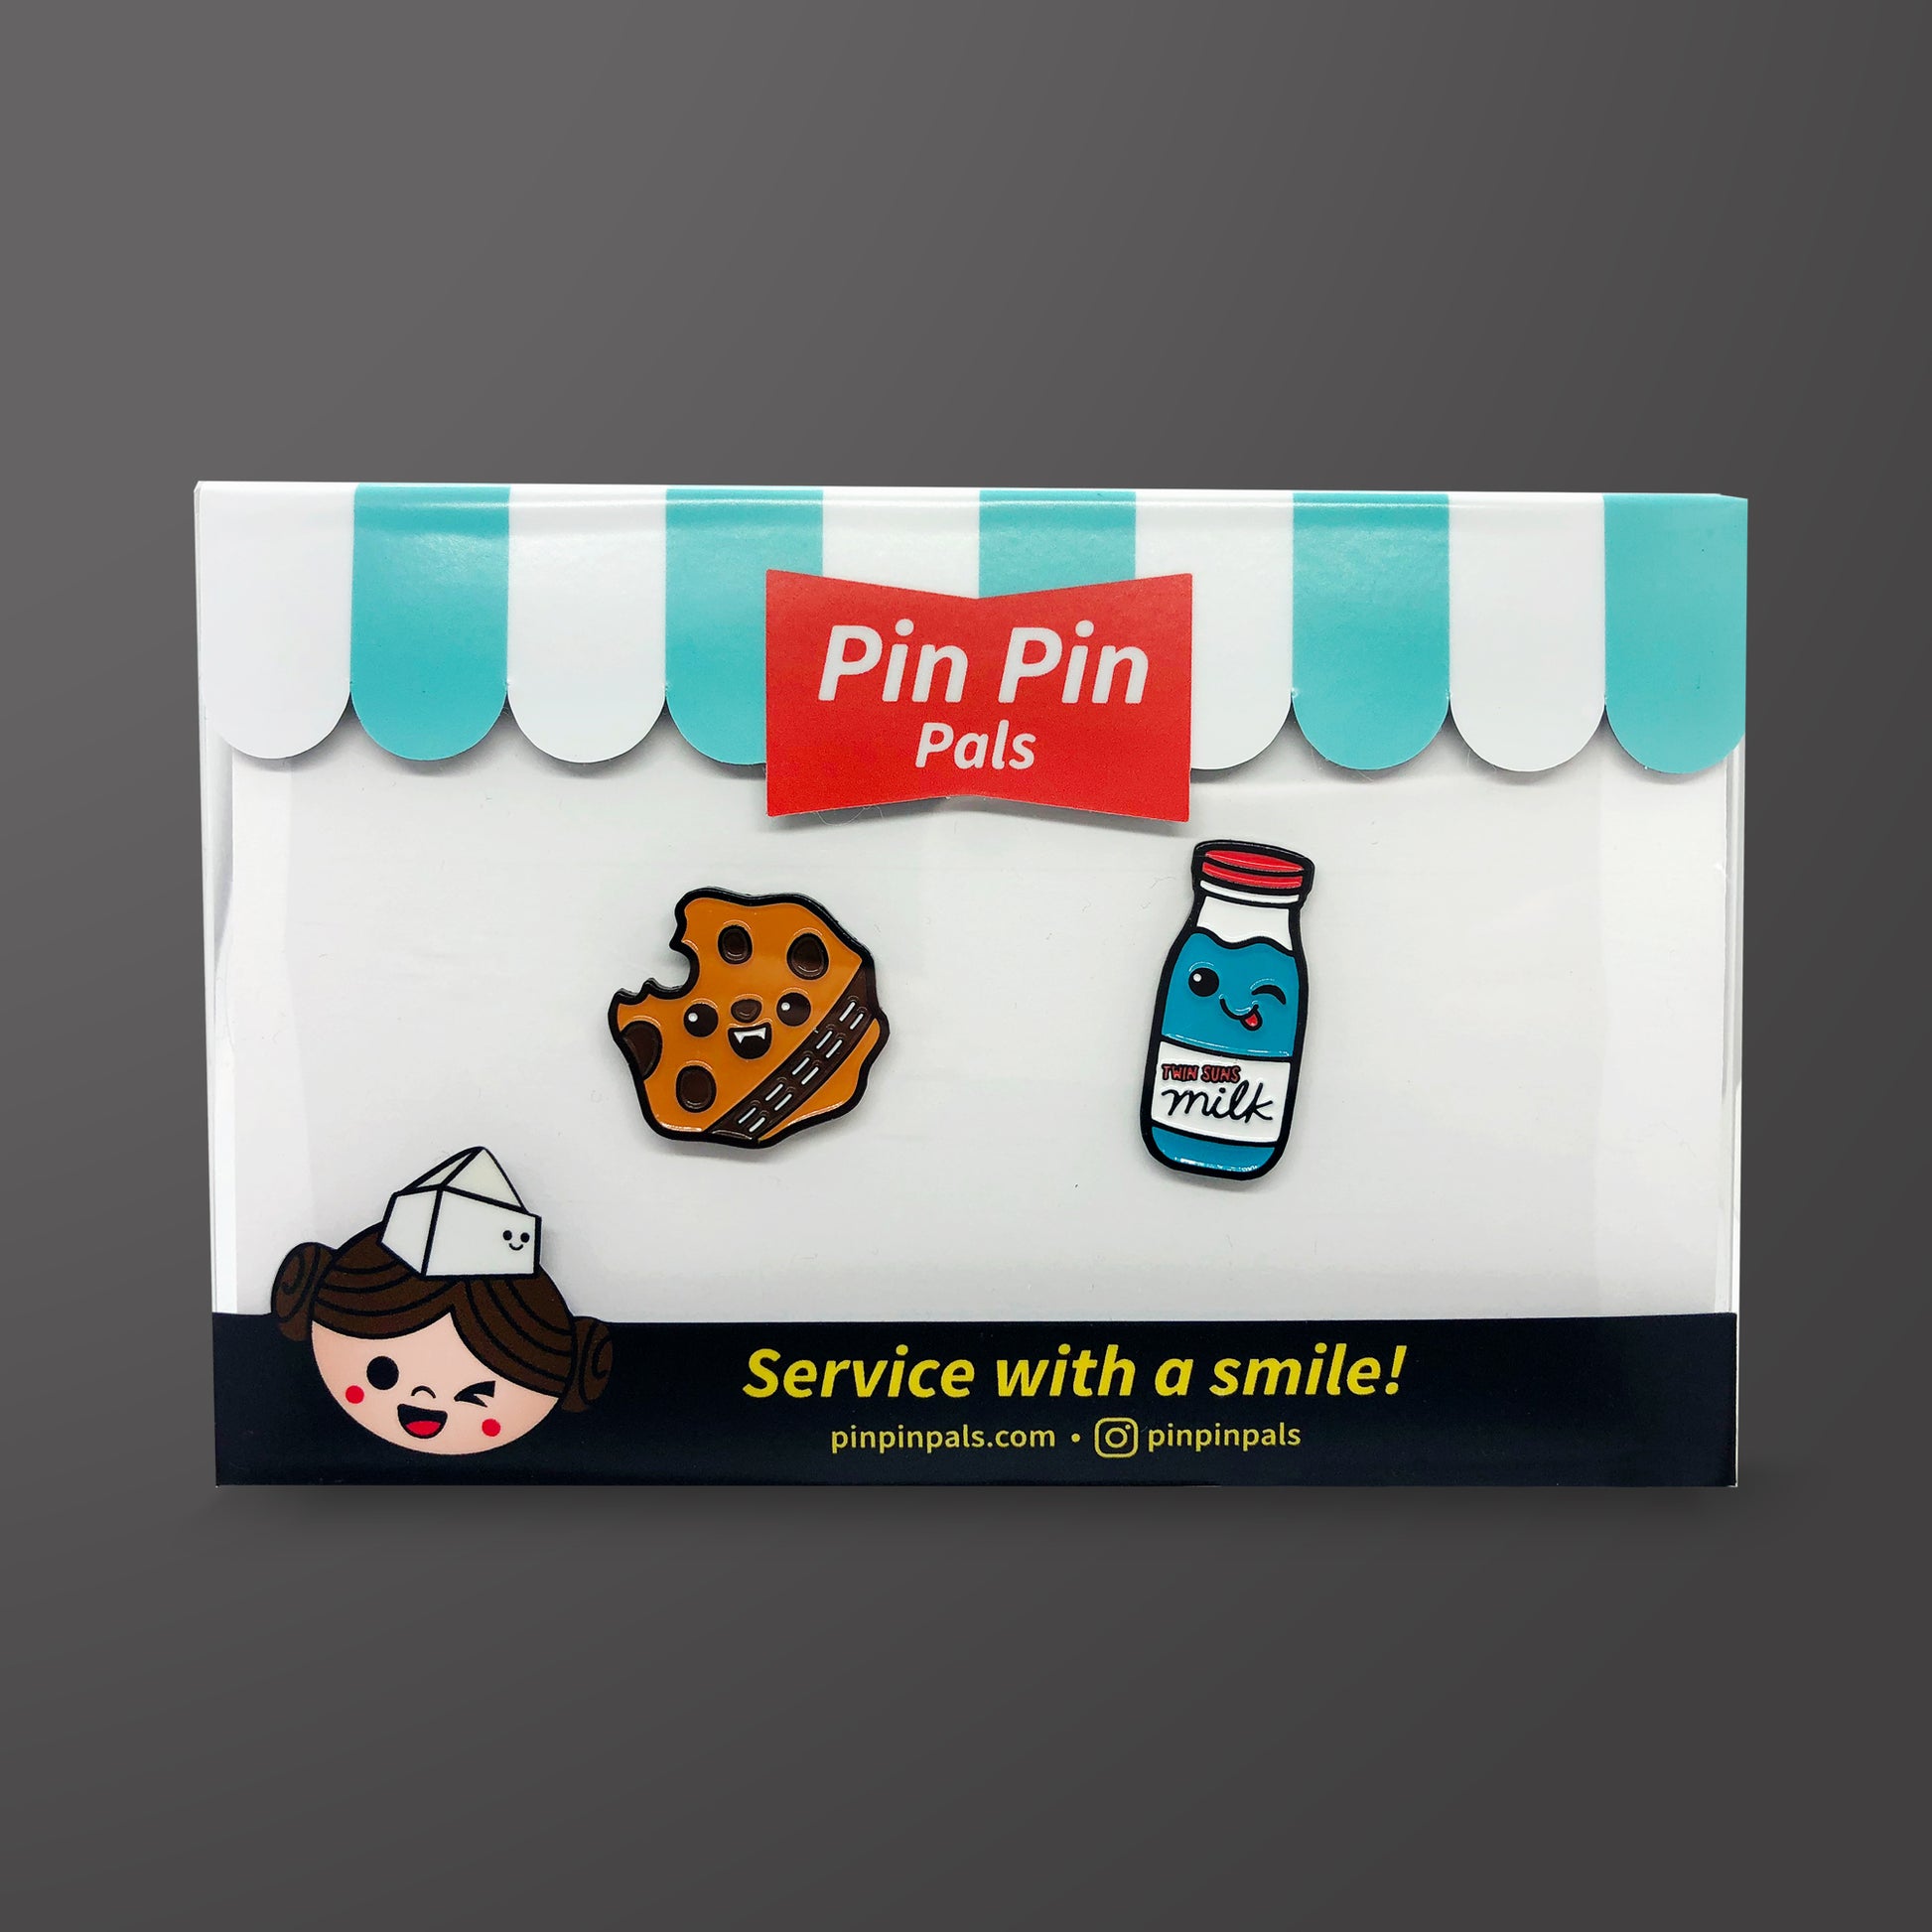 Pin Pin Pals Star Wars Wookie Cookie and Blue Milk enamel pin set in packaging box on grey background